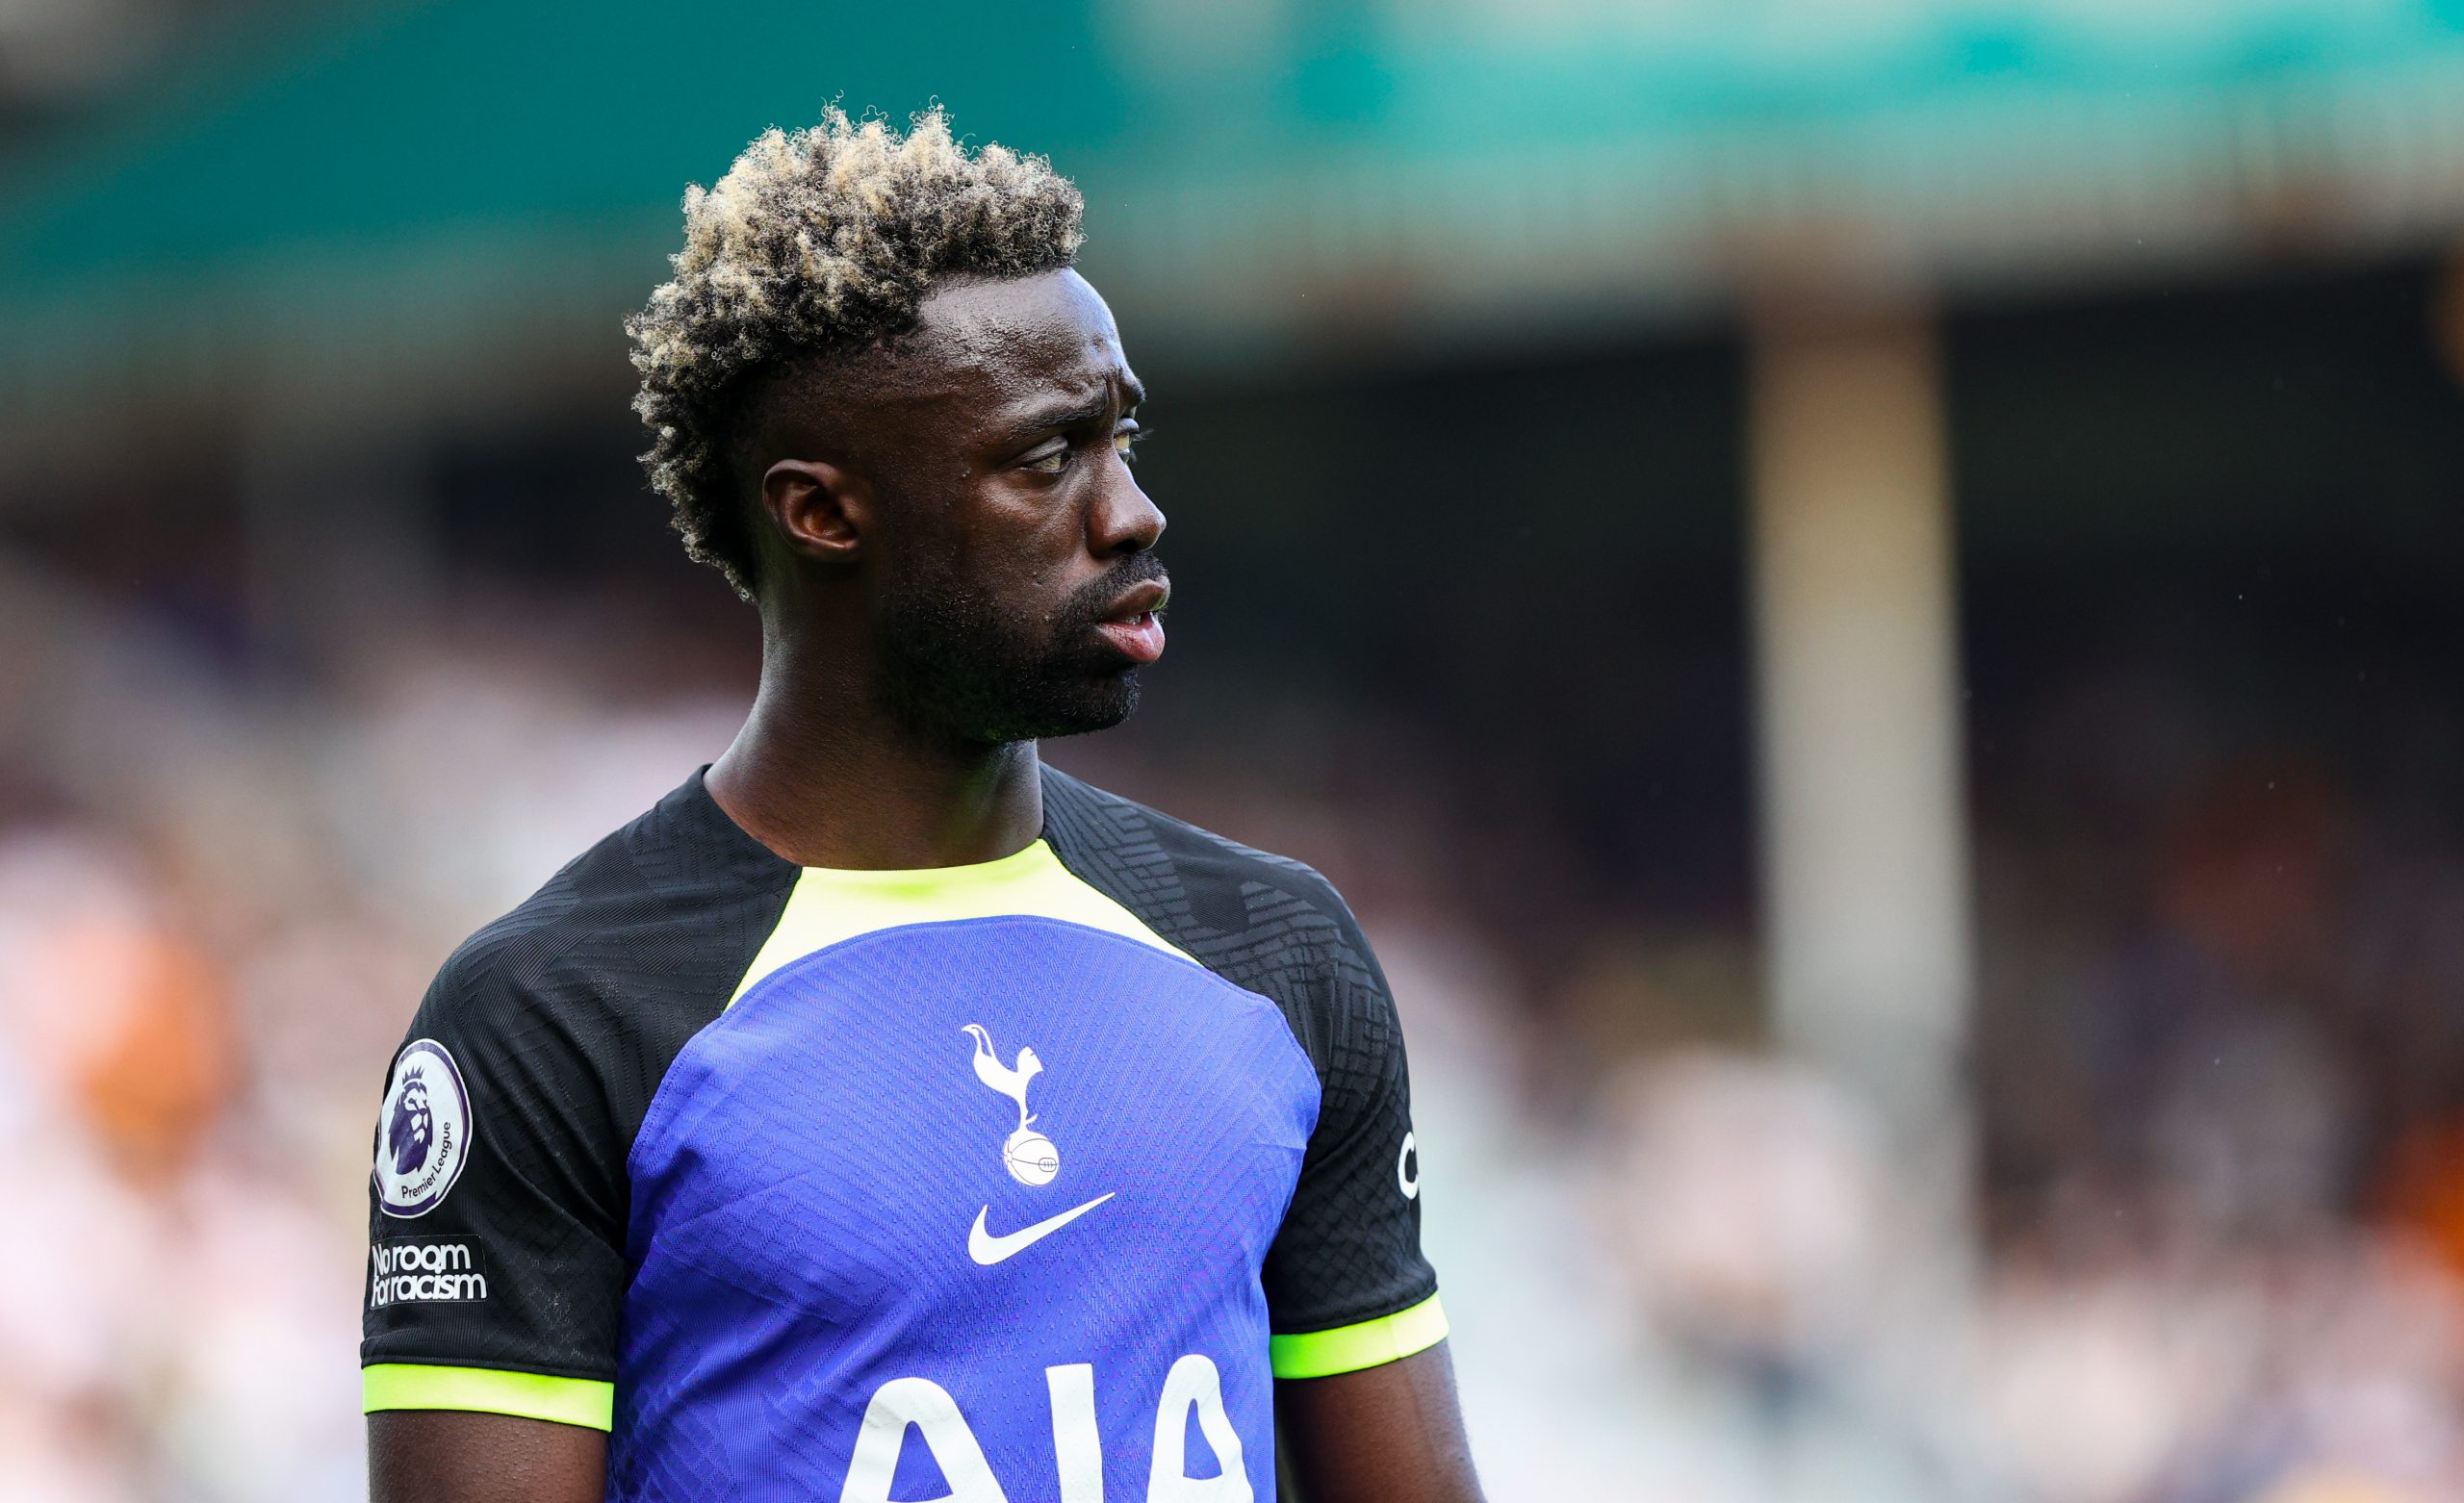 Tottenham transfer exit for Davinson Sanchez wrecked by Russia’s war in Ukraine as Premier League fires warning